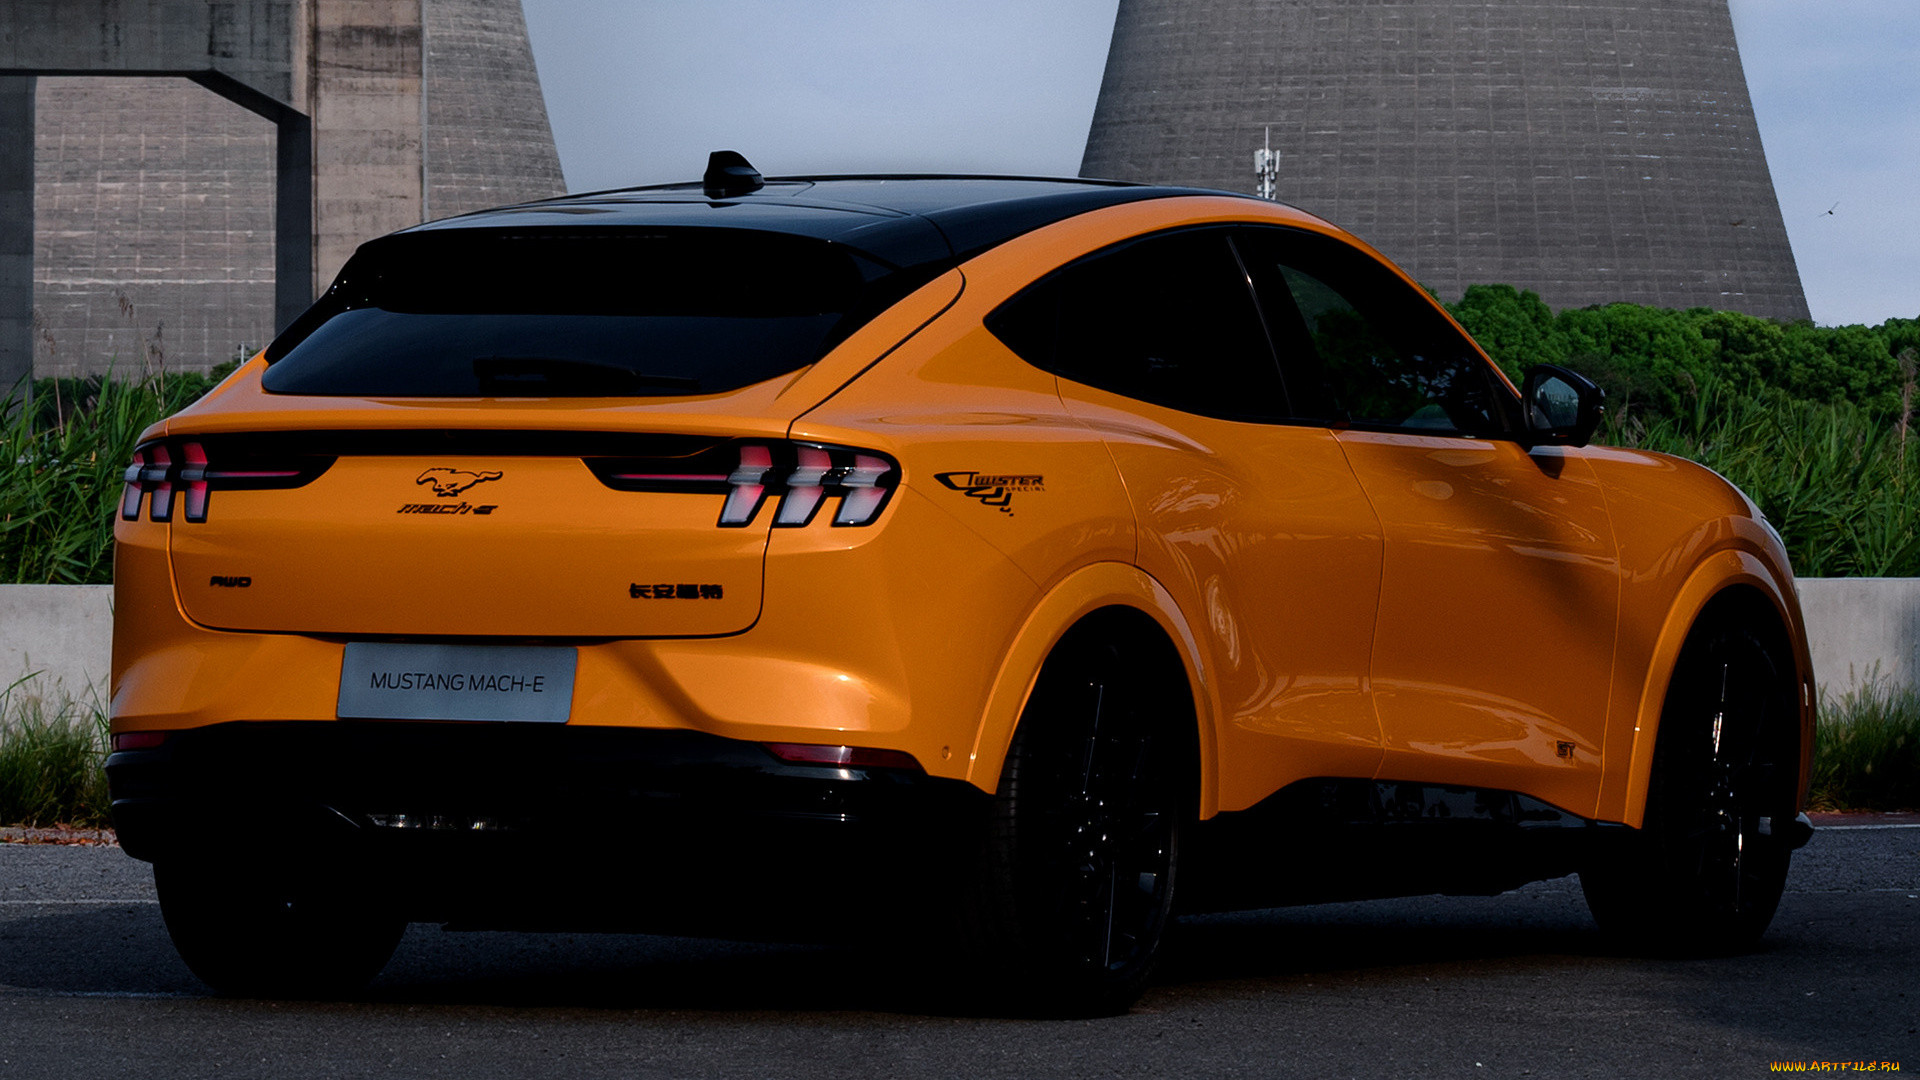 ford mustang mach-e gt twister special , cn,  2022, , mustang, ford, mach-e, gt, twister, special, 2022